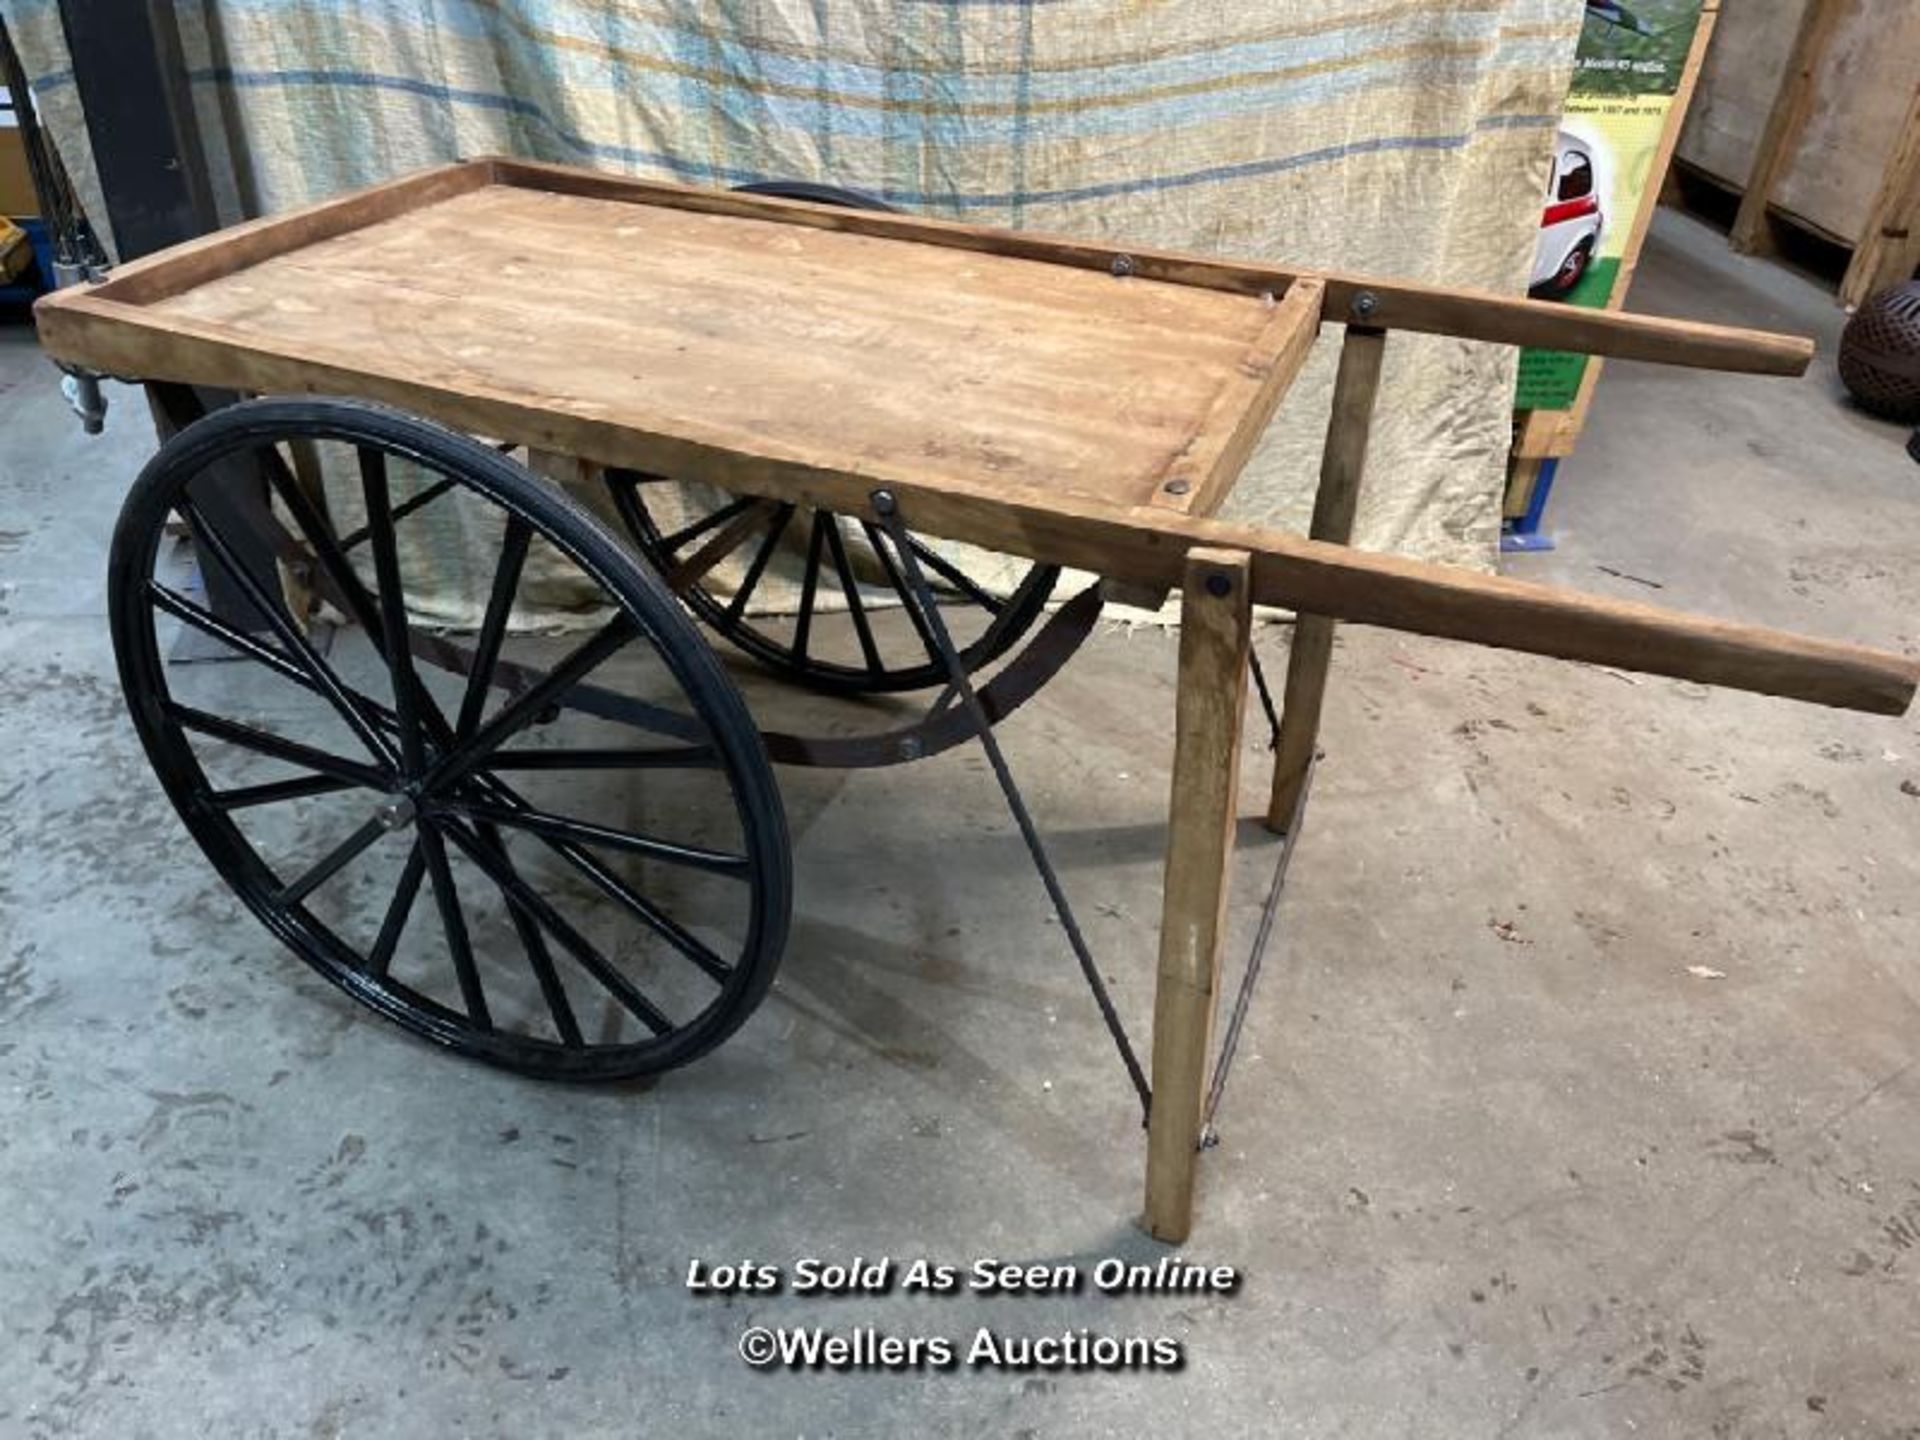 *TRADERS 2 WHEEL BARROW, BED 100CM (L) X 65CM (H), WHEELS 68CM (DIA) / COLLECTION LOCATION: